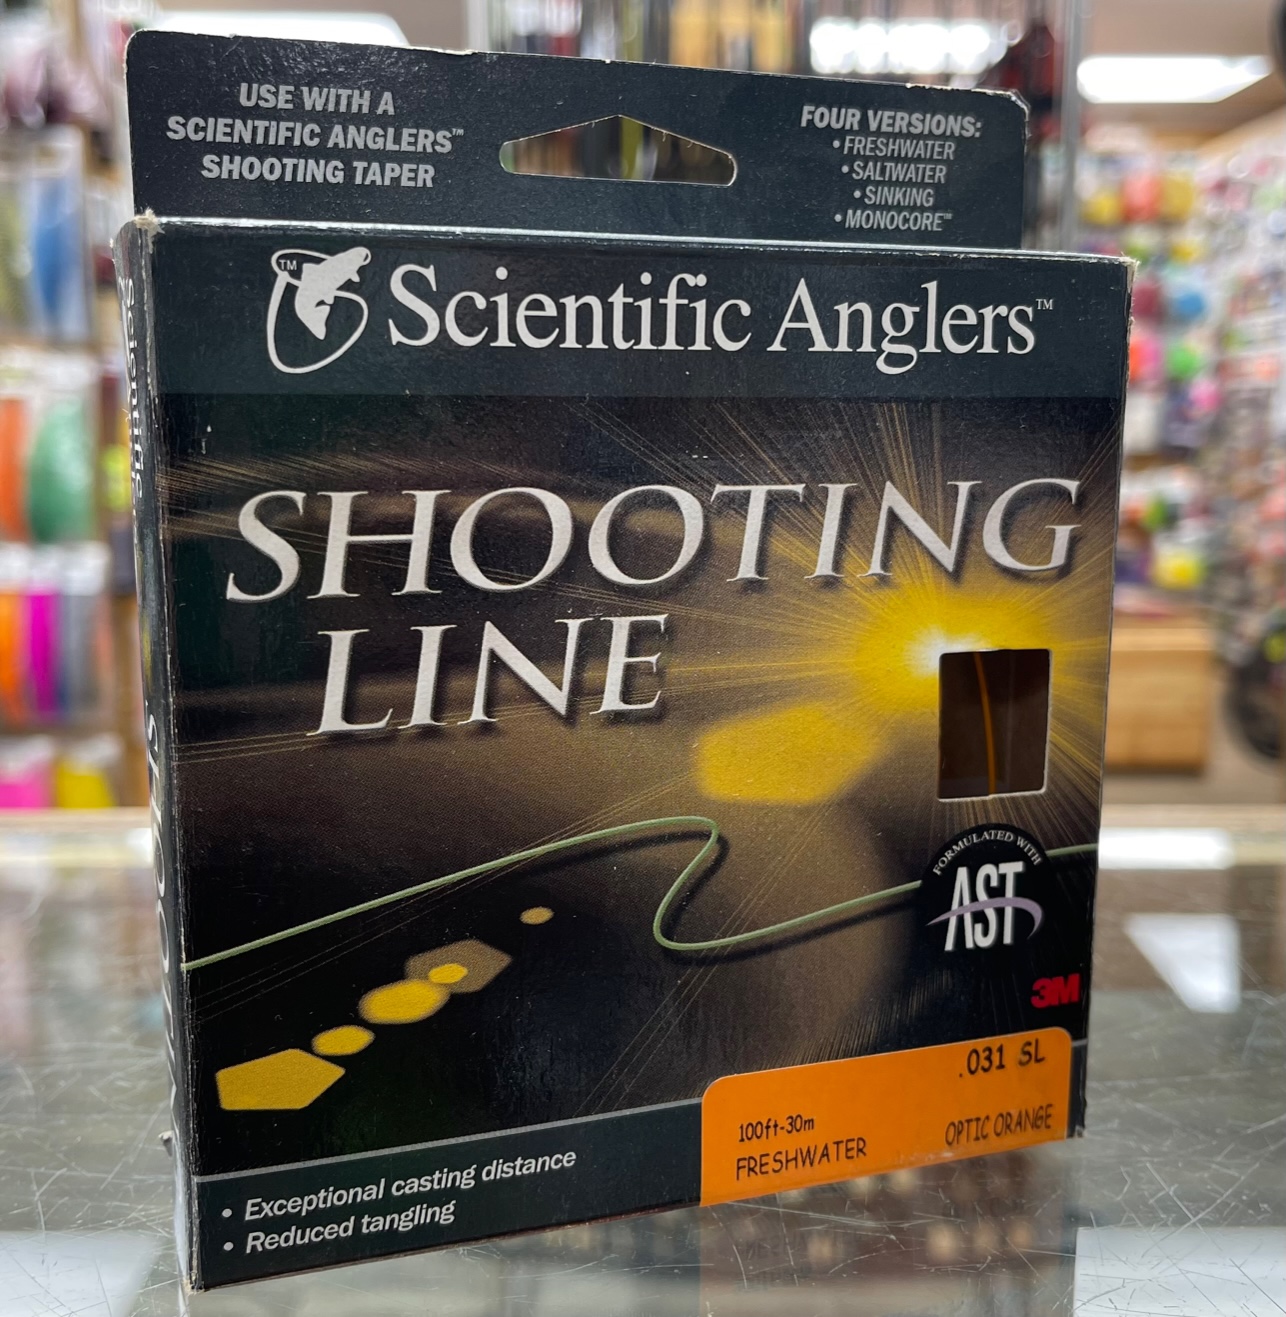 Scientific Anglers Running Line Freshwater .031